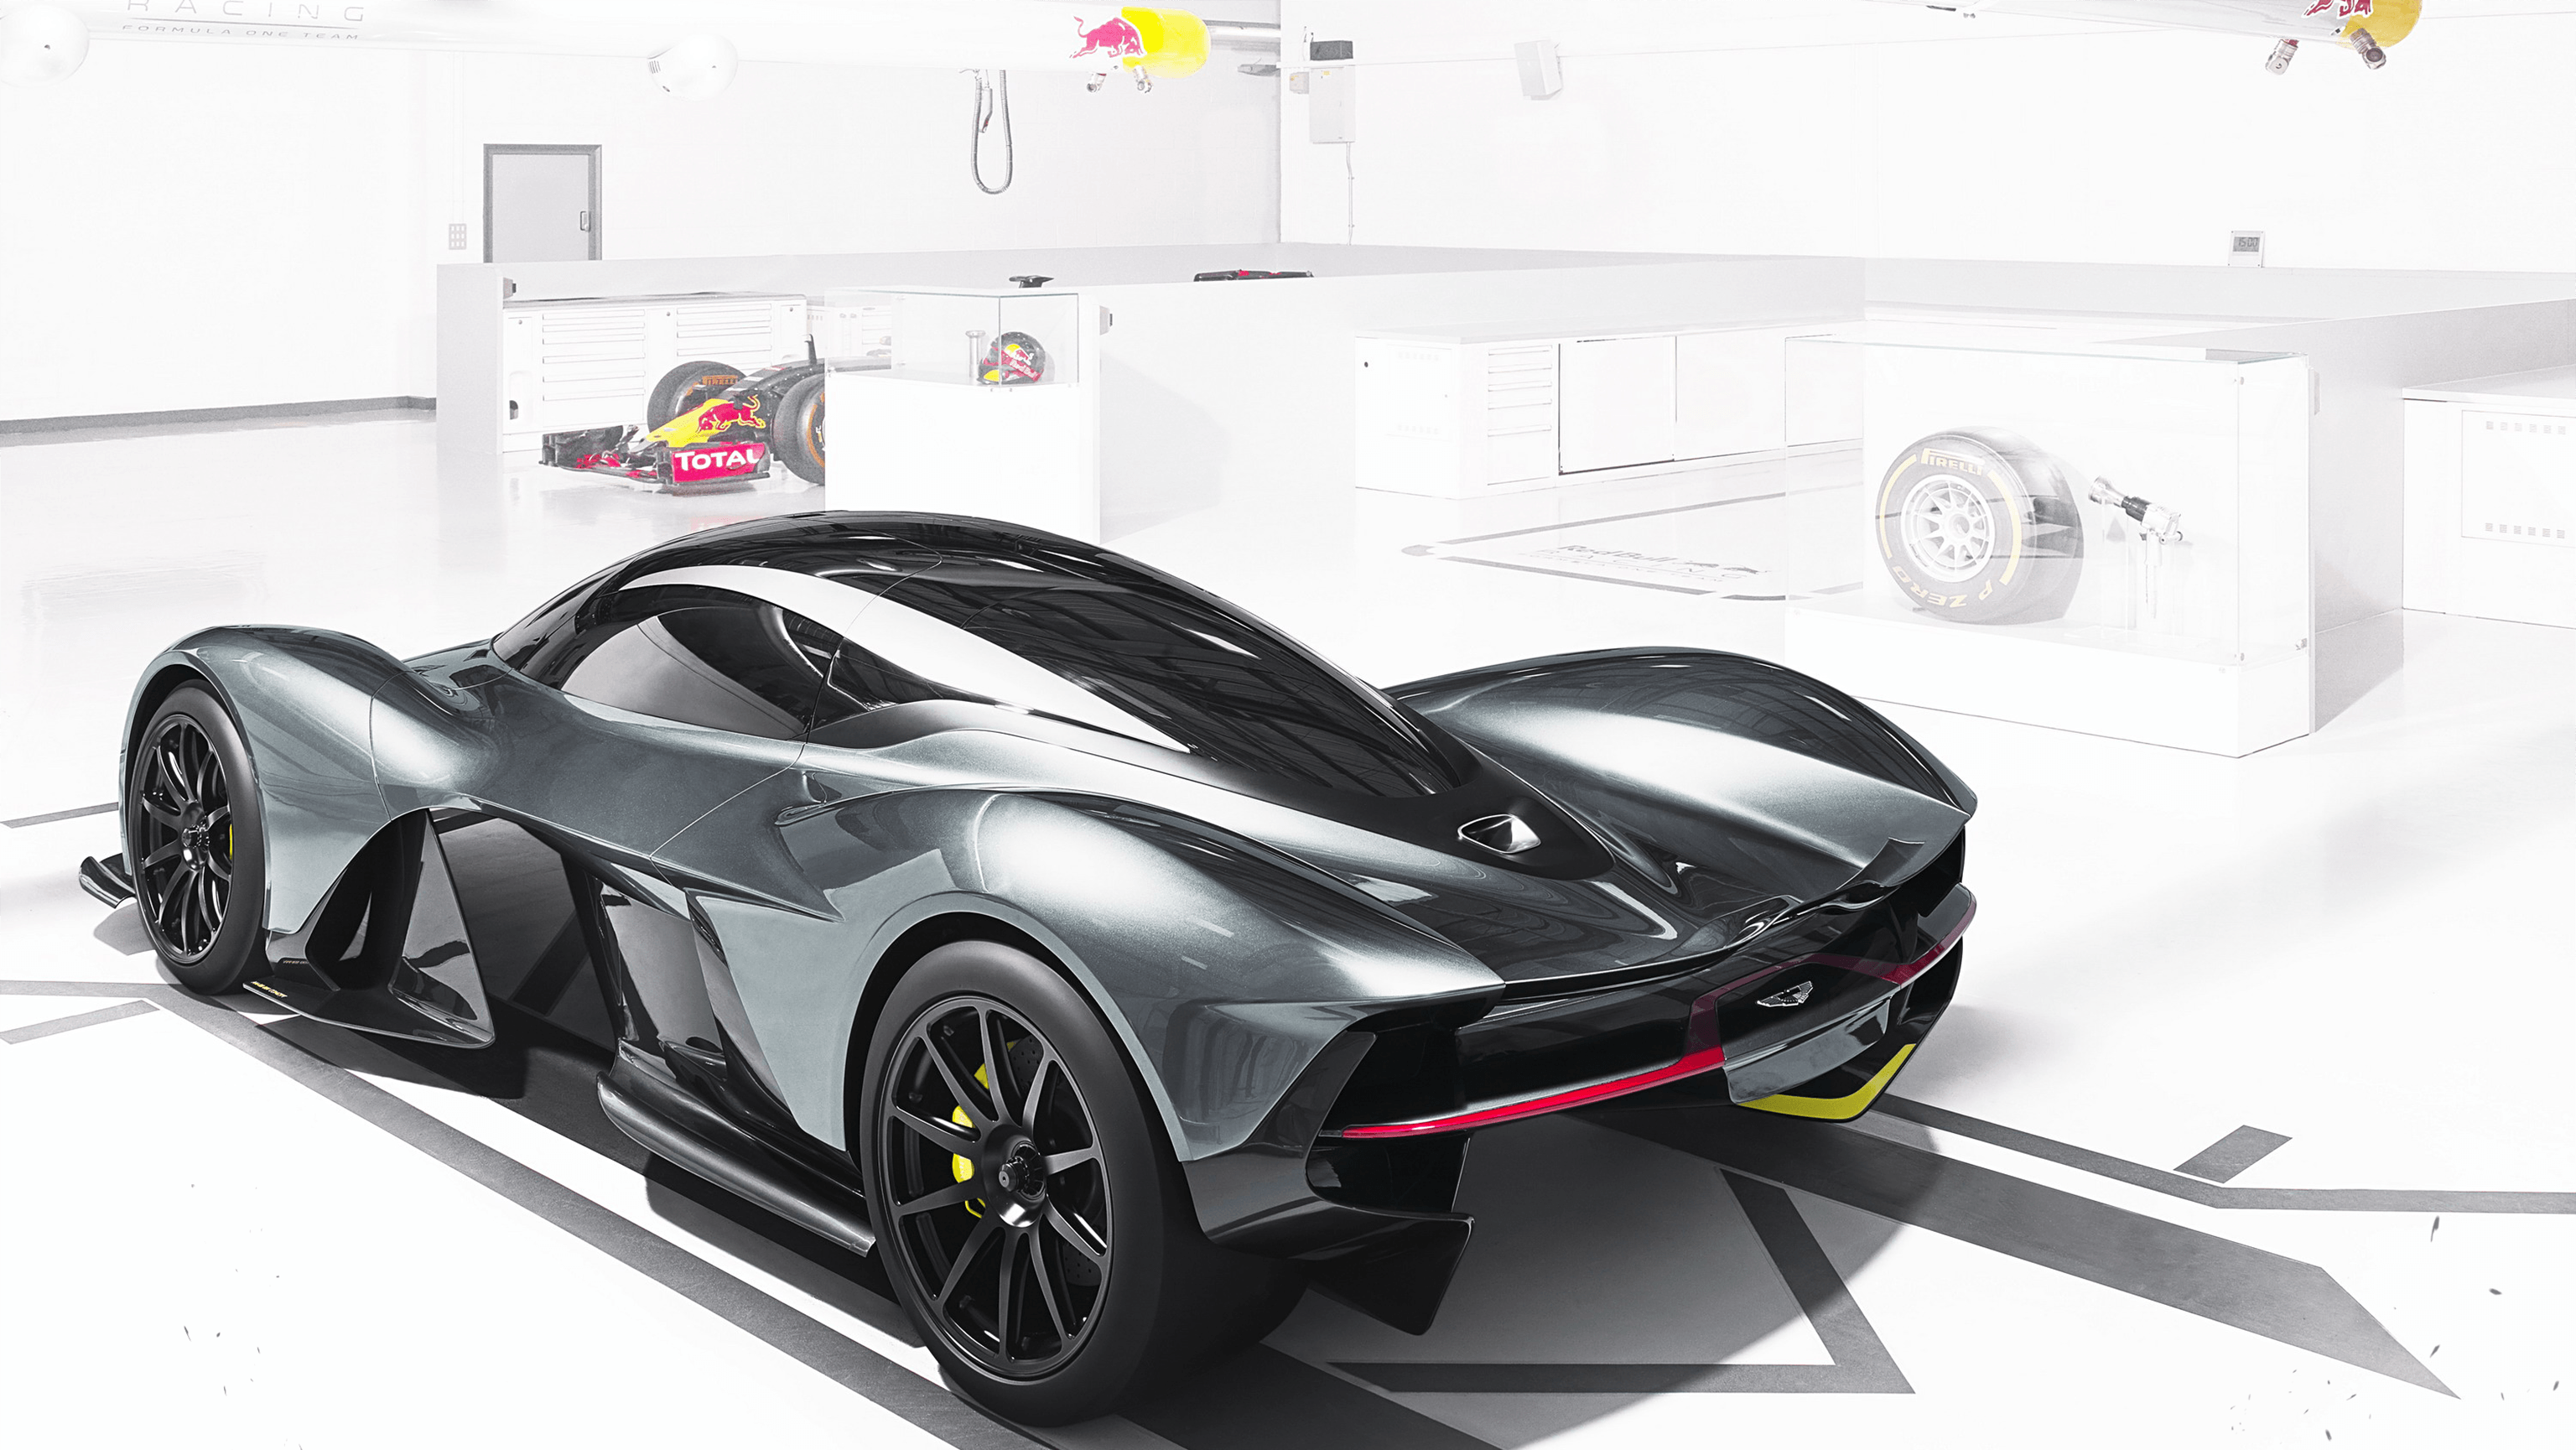 Aston Martin Valkyrie Wallpapers - Wallpaper Cave